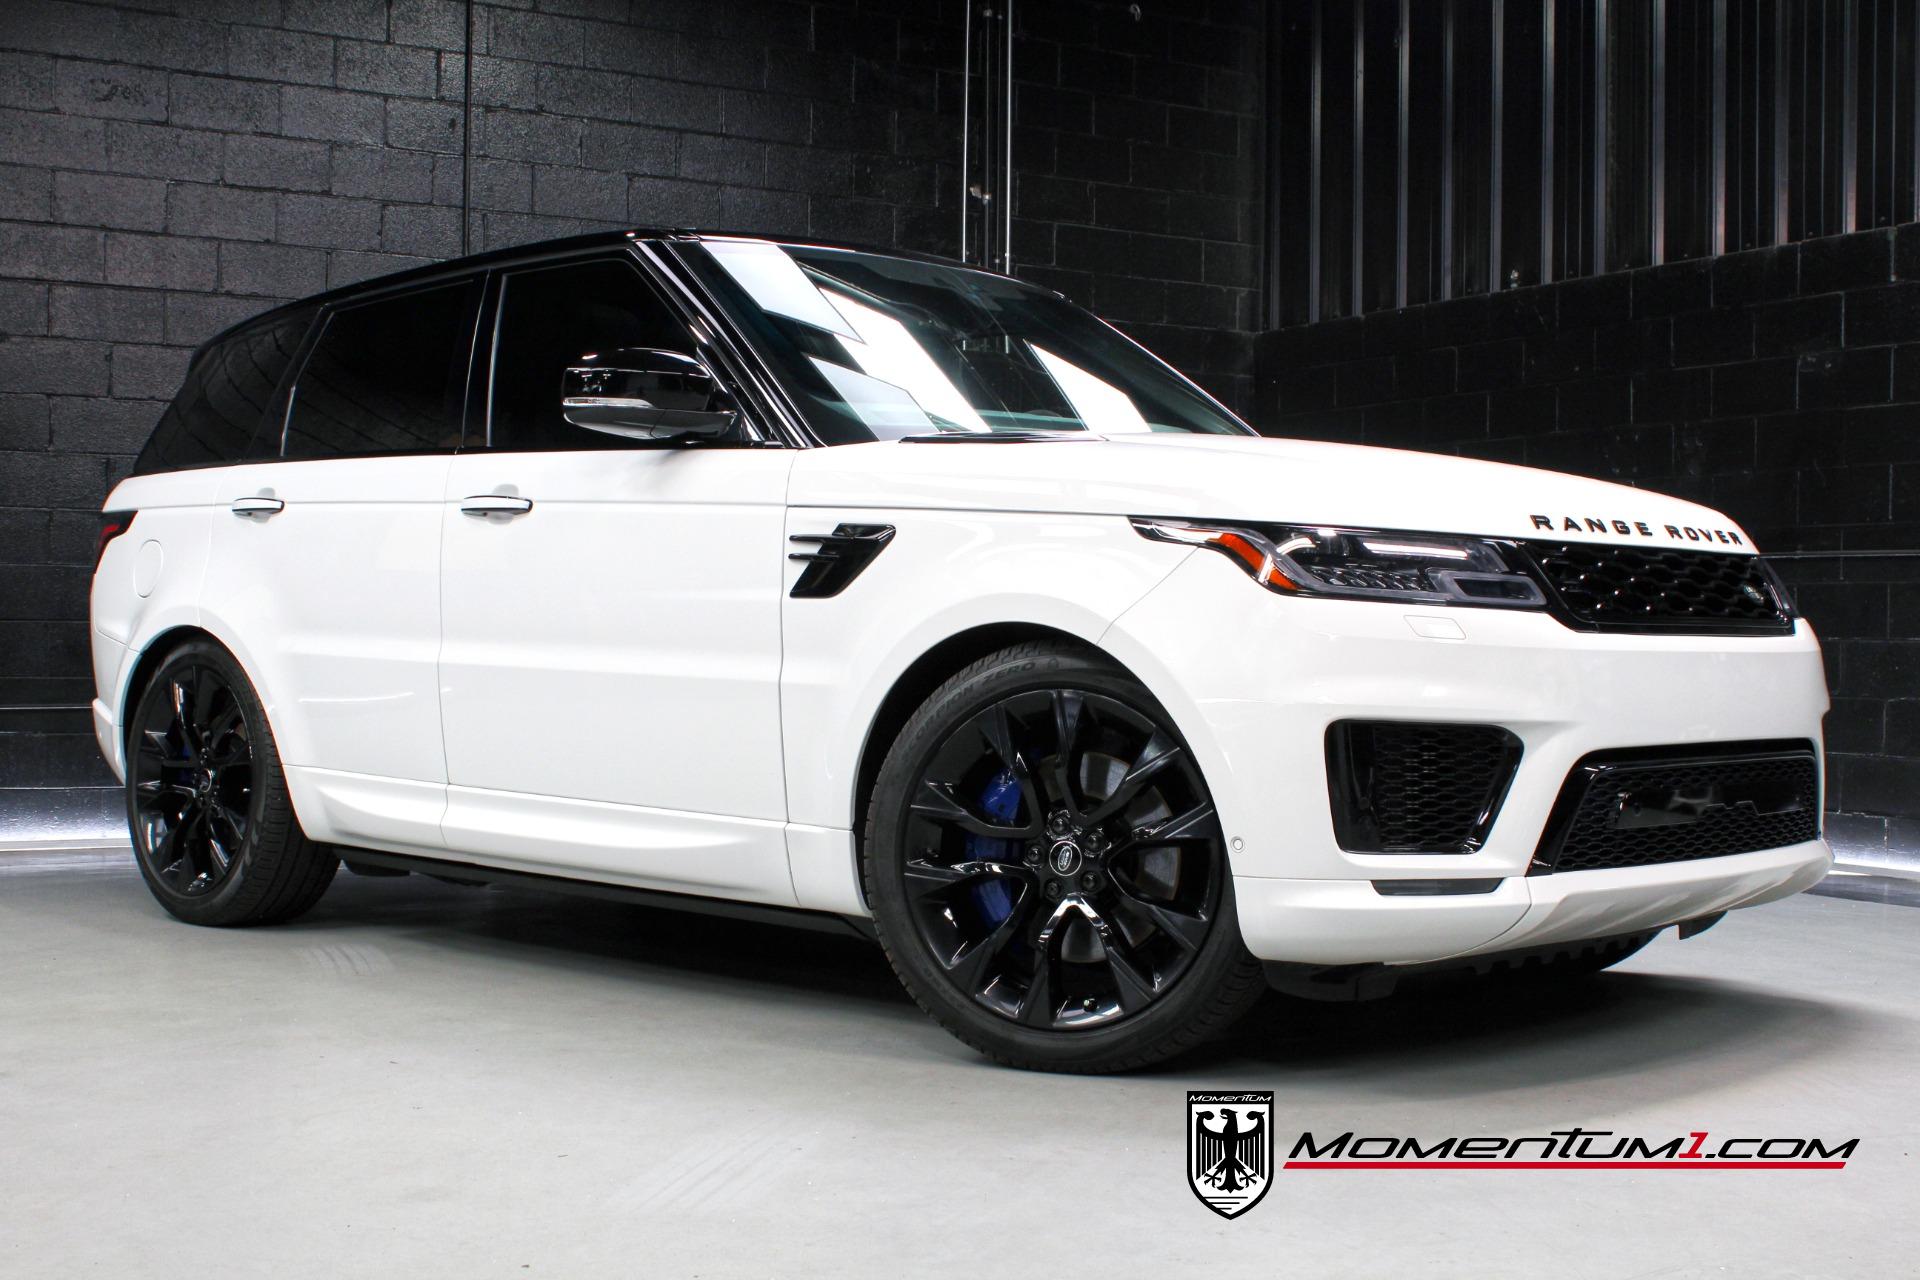 Used 2018 Land Rover Range Rover Sport HSE Dynamic $87k+MSRP! Panoramic  Roof! Soft Close Doors! Gorgeous! For Sale (Special Pricing)